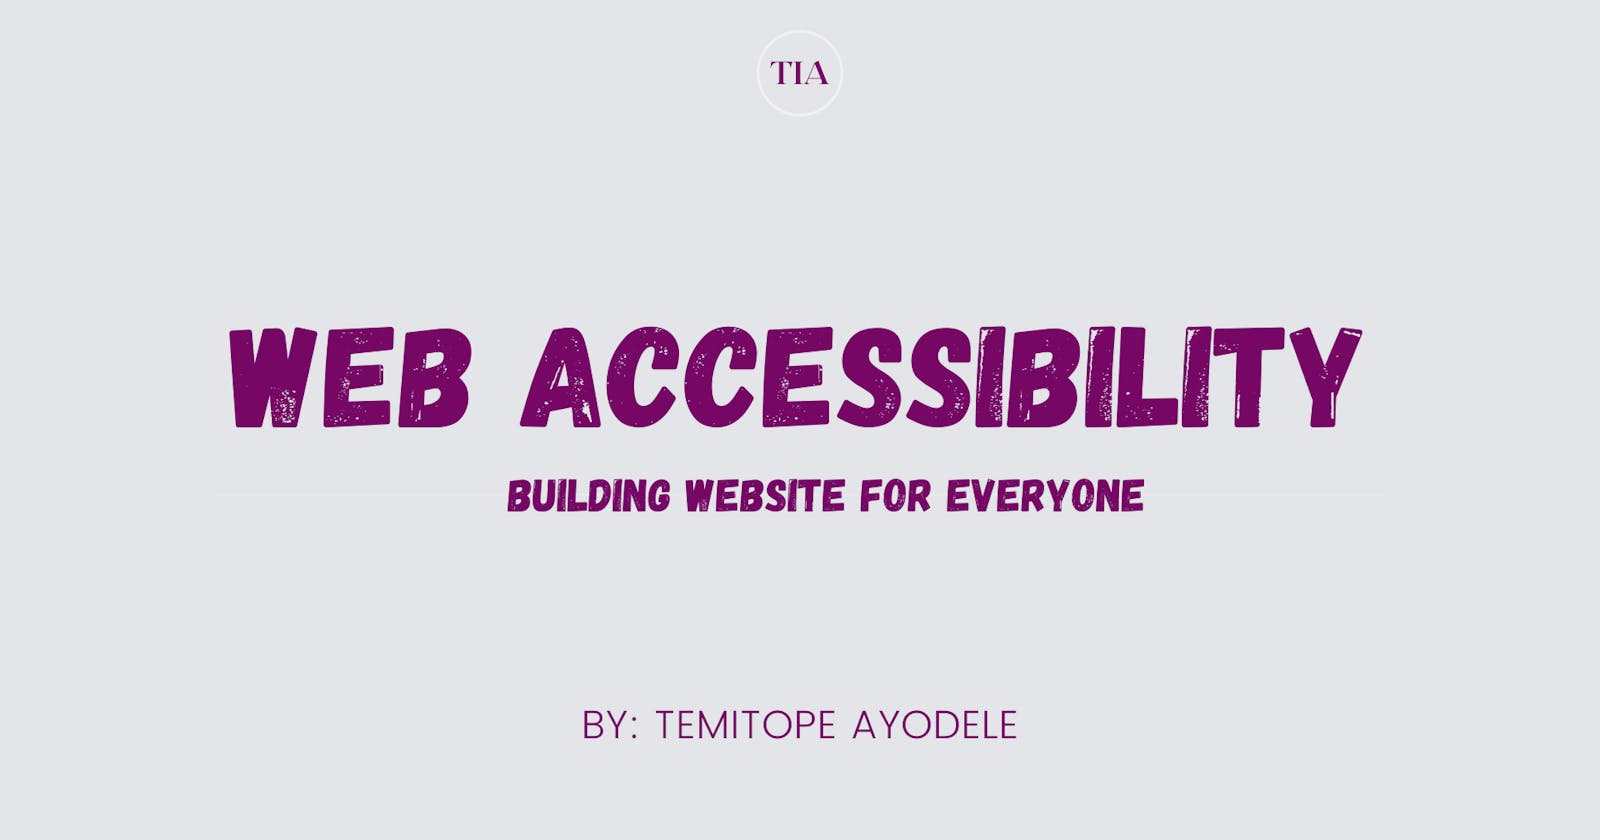 Web Accessibility- Building website for everyone